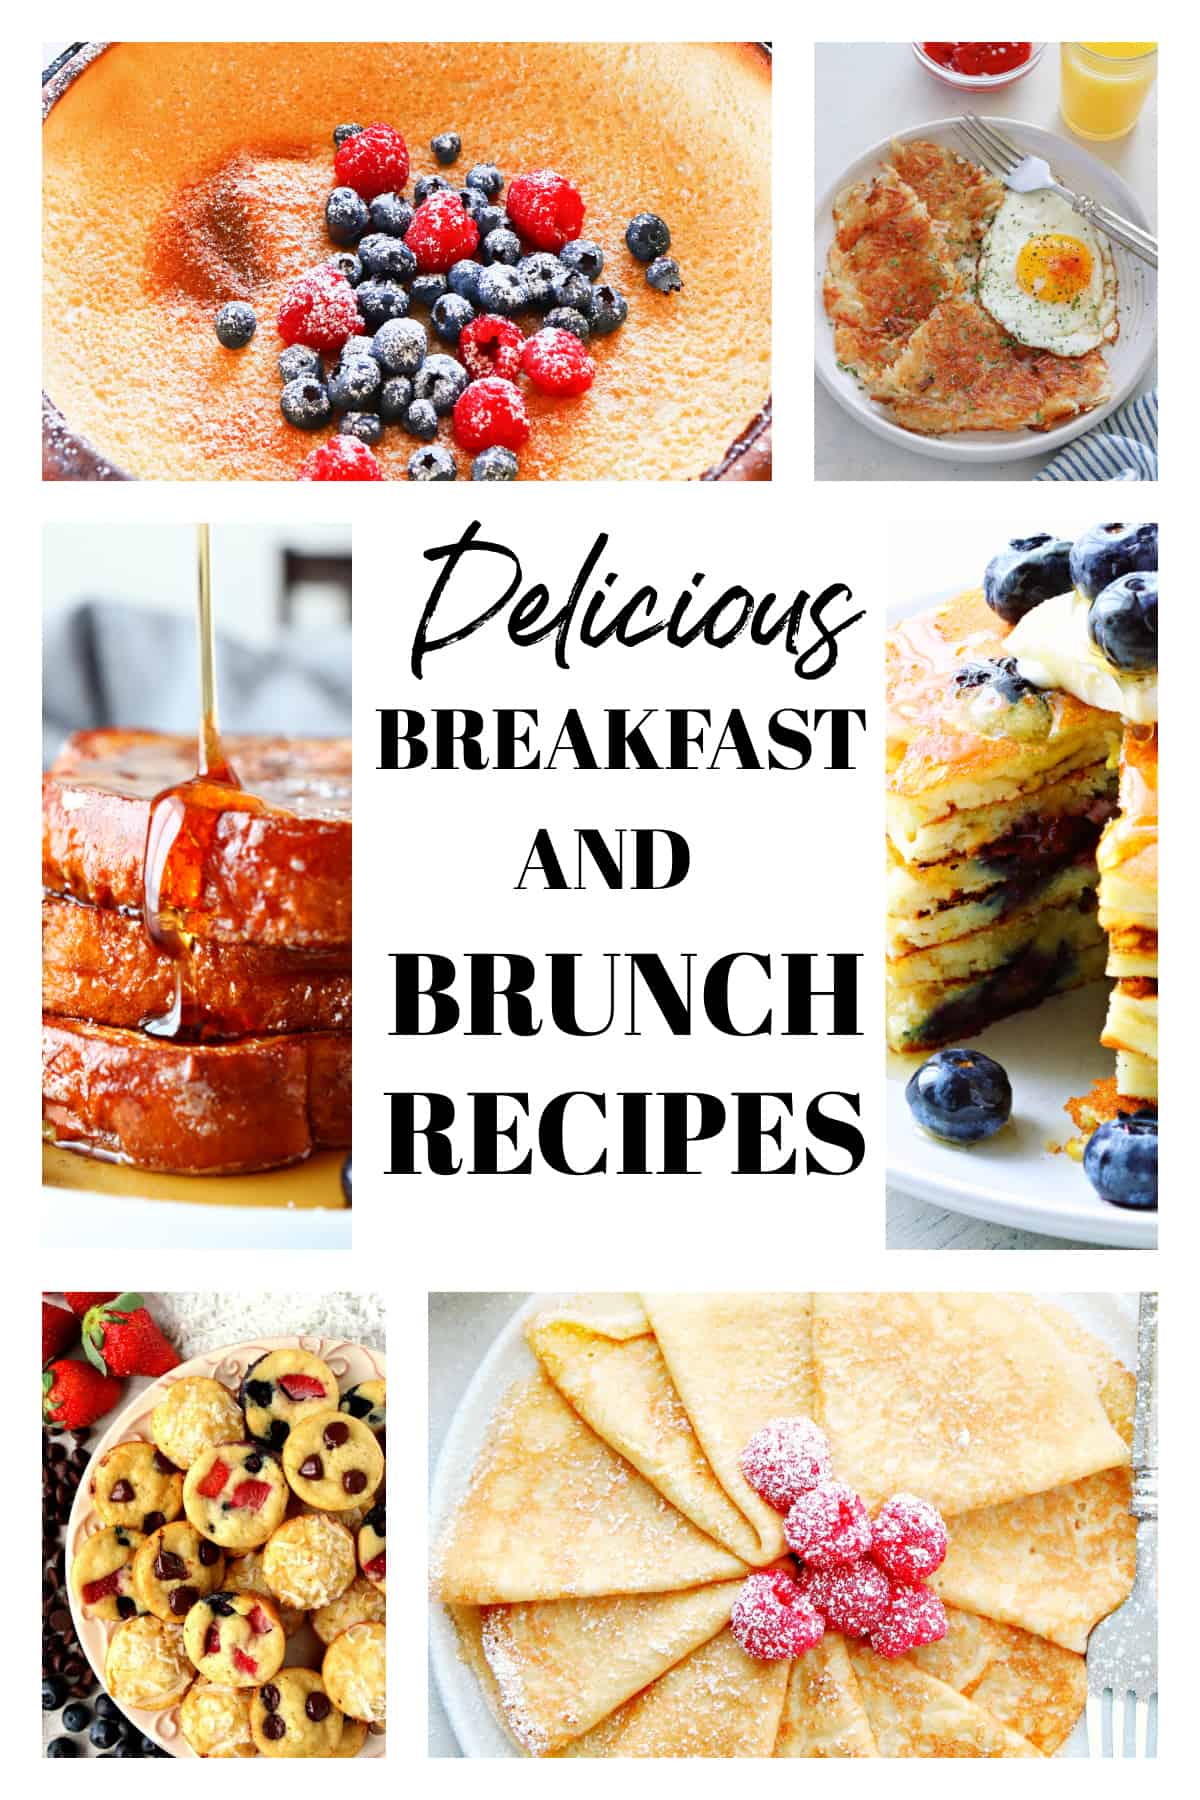 Photo collage for brunch recipes round up.